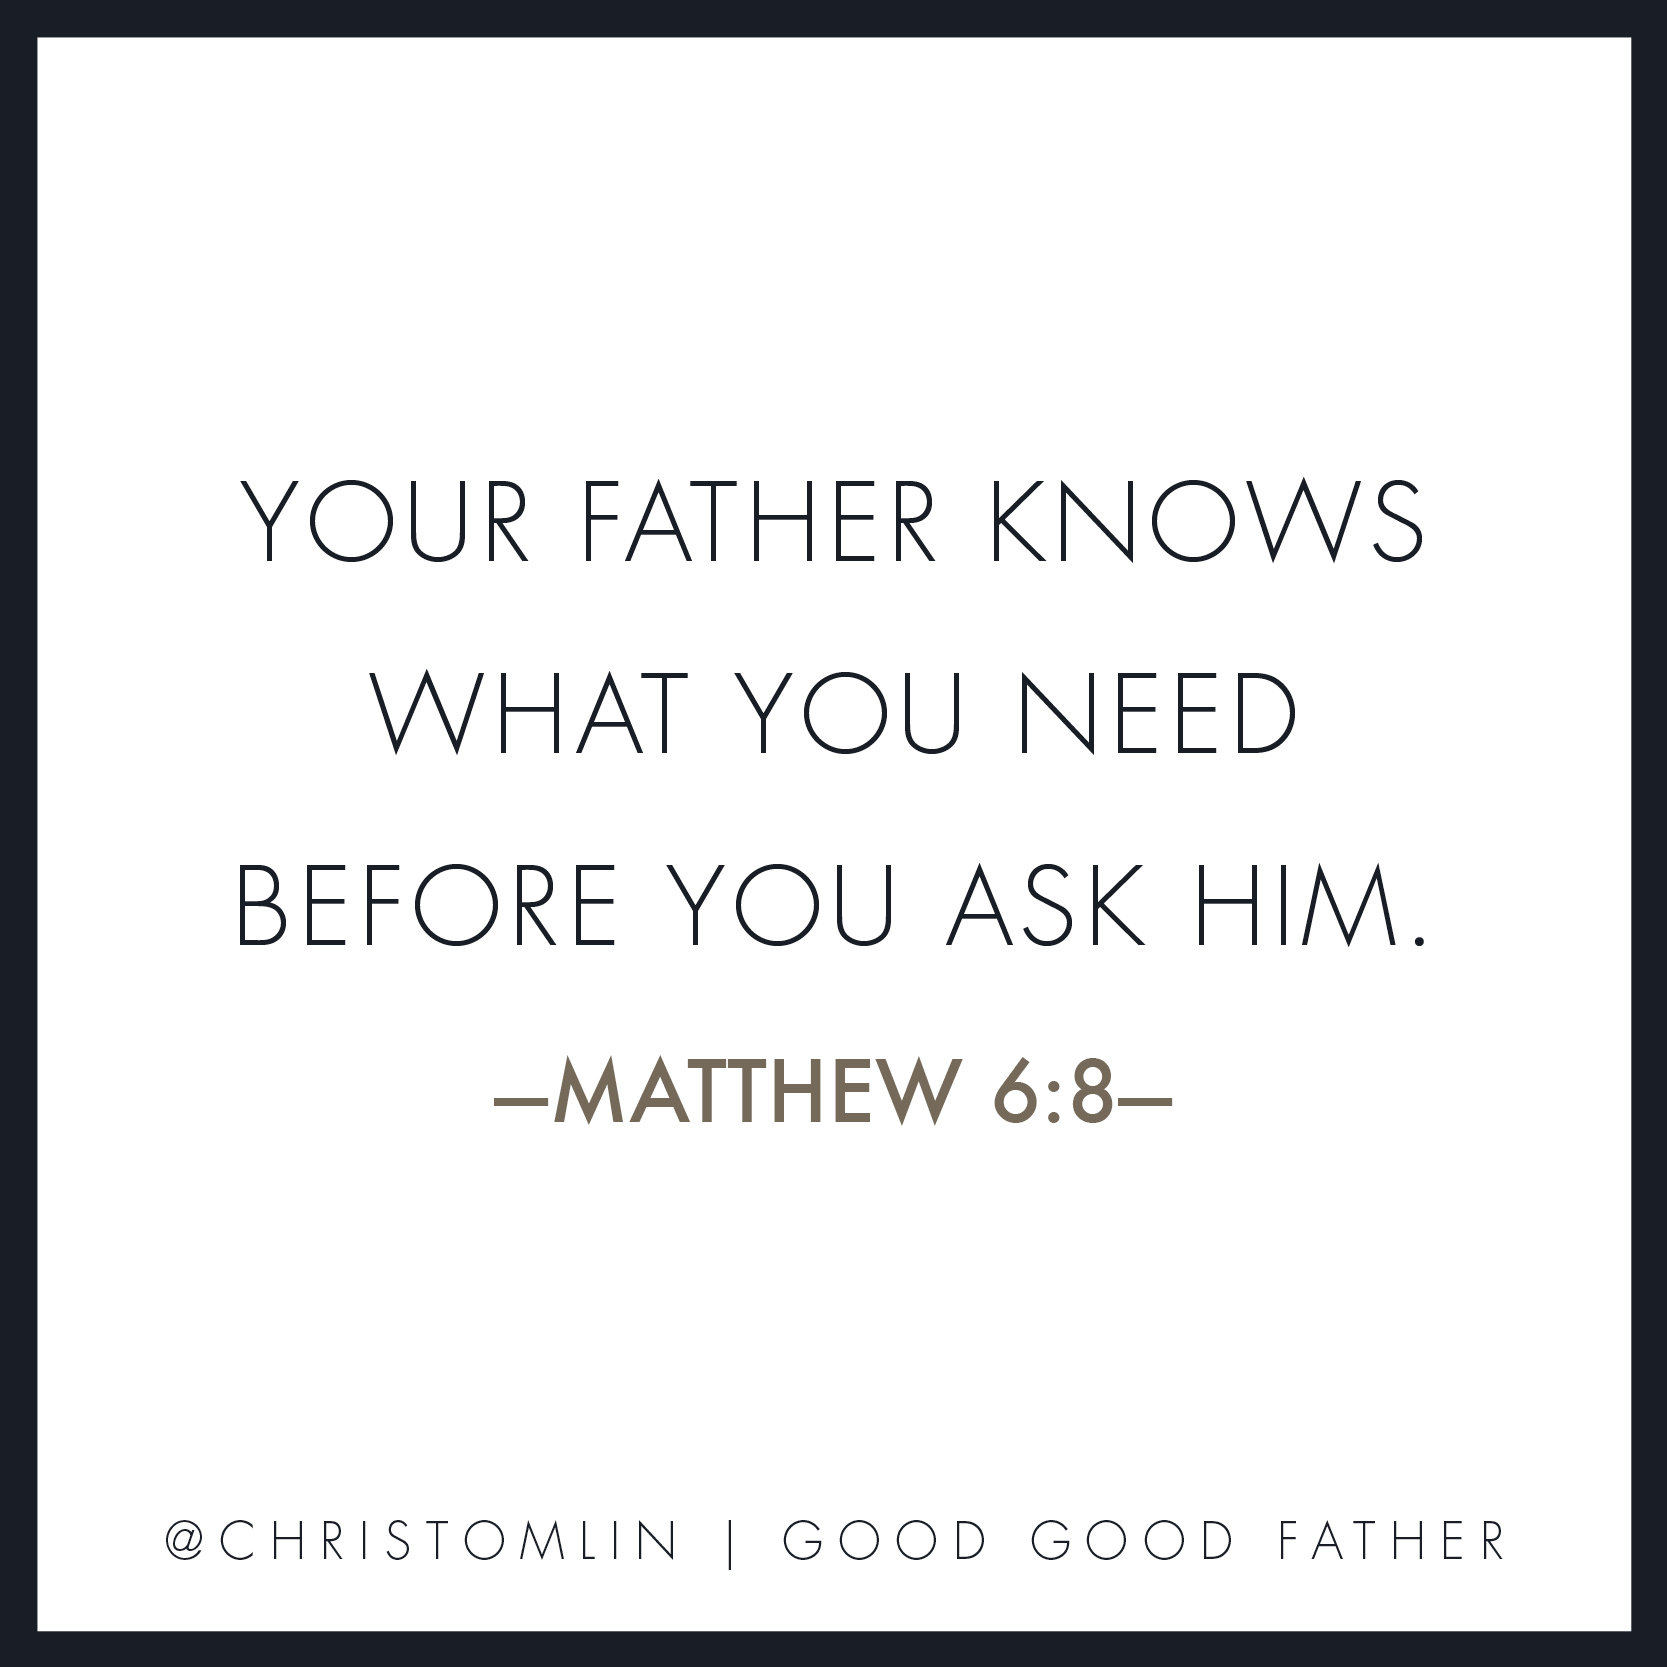 Your father knows what you need before you even ask him.